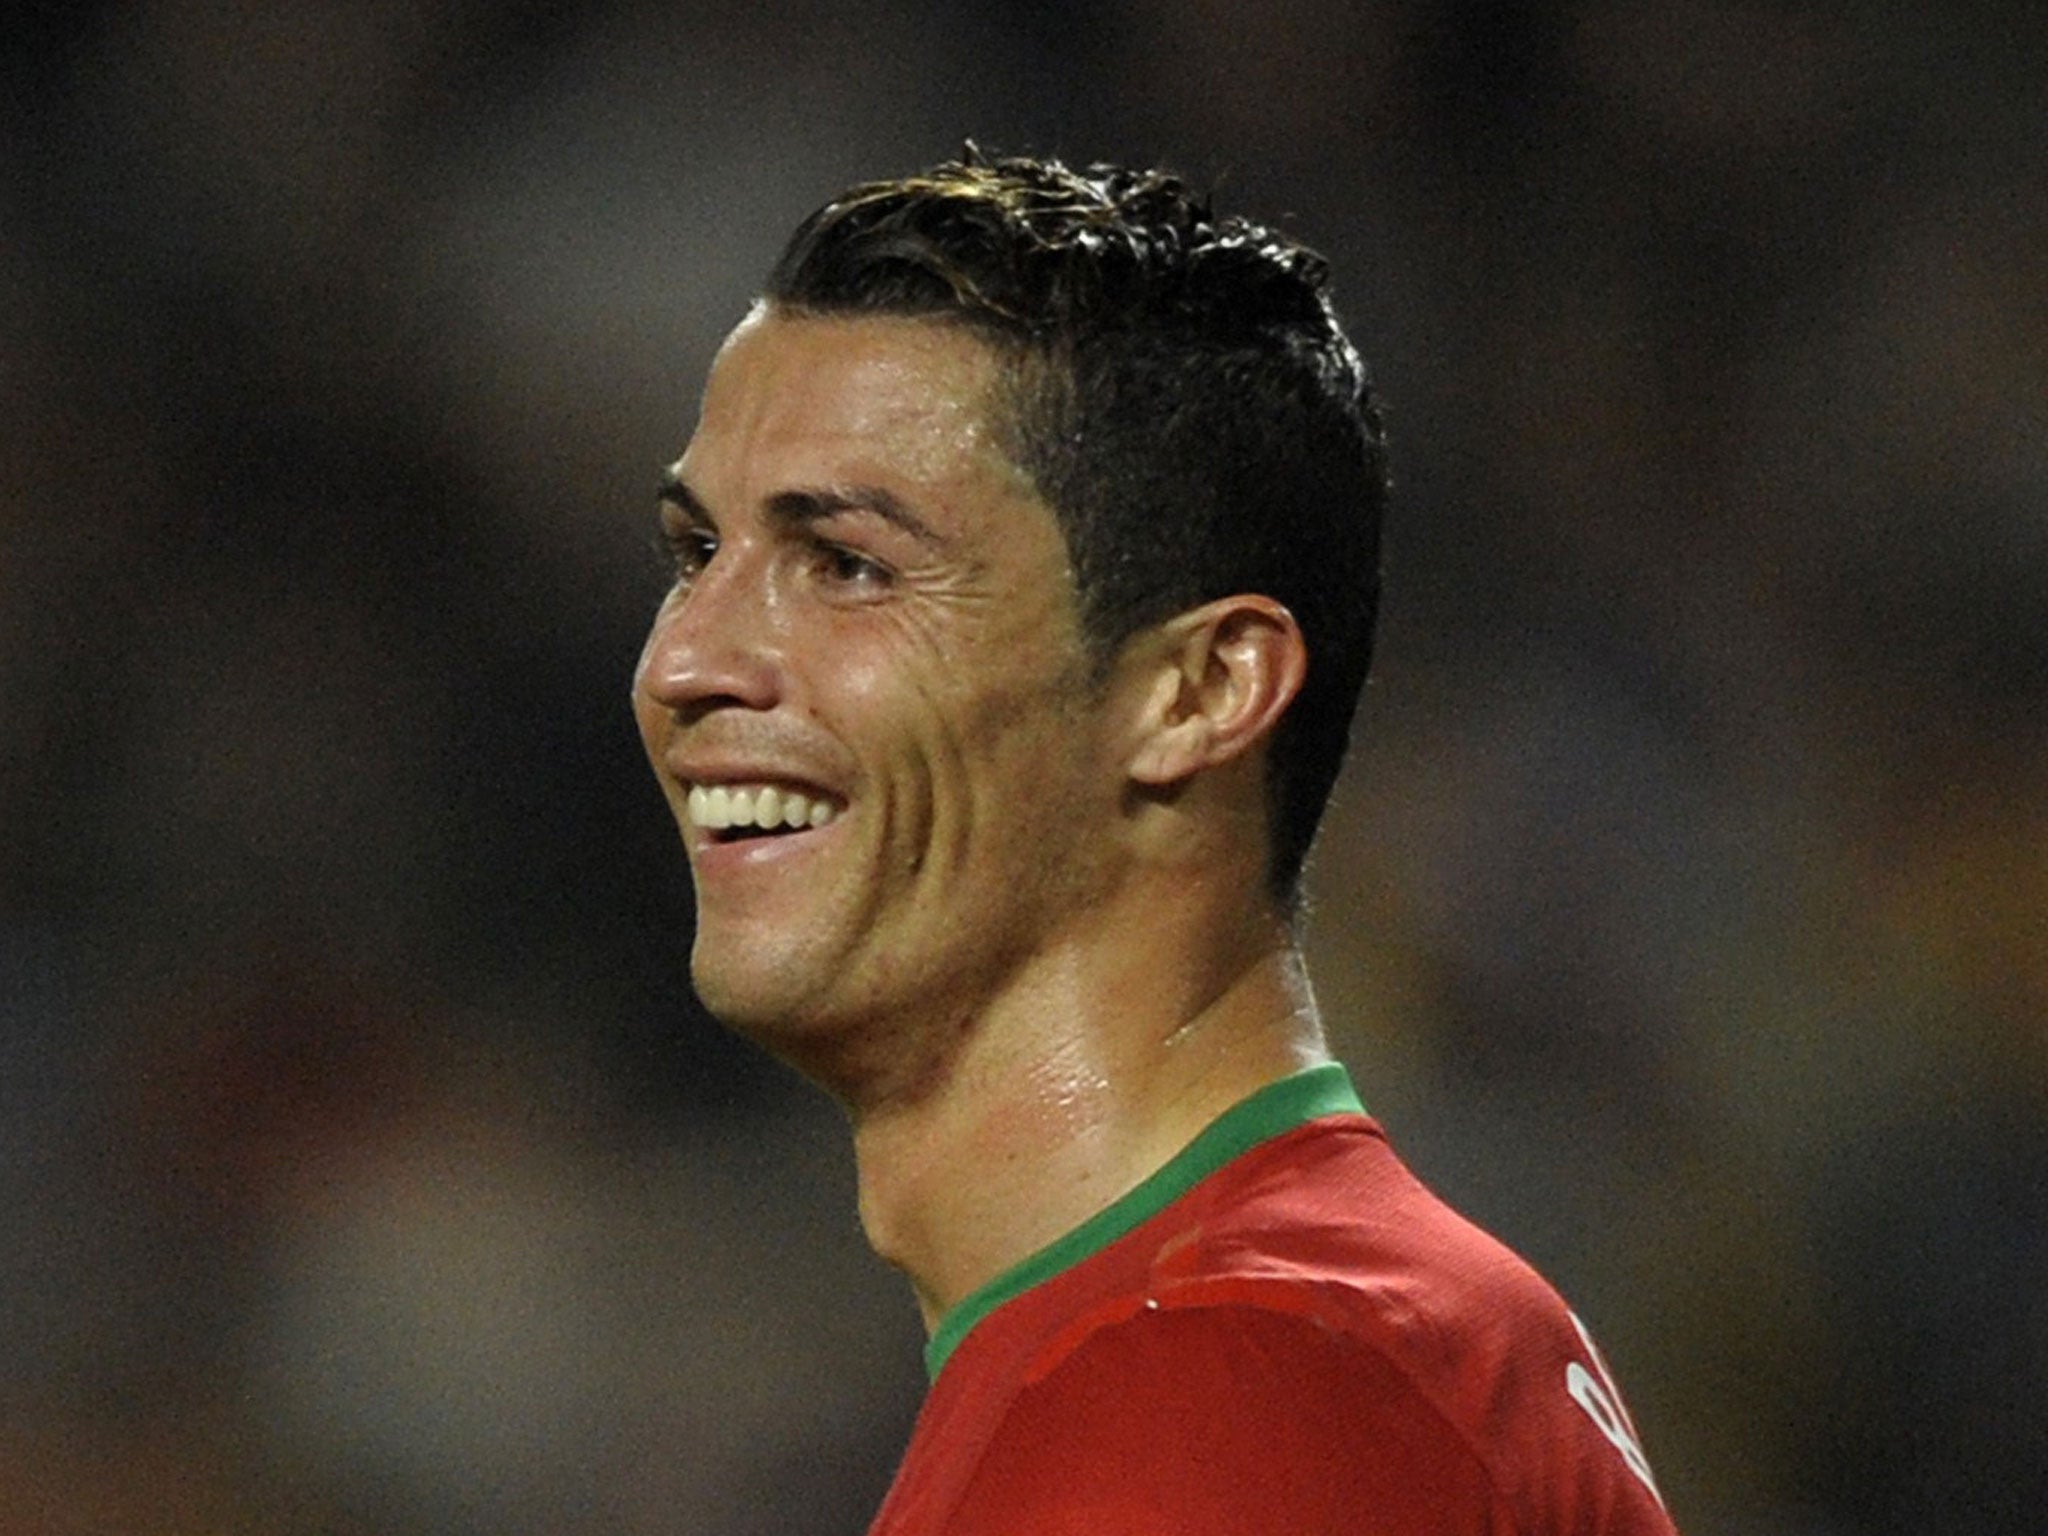 Cristiano Ronaldo smiles during the match Portugal against Sweden at the Luz stadium in Lisbon